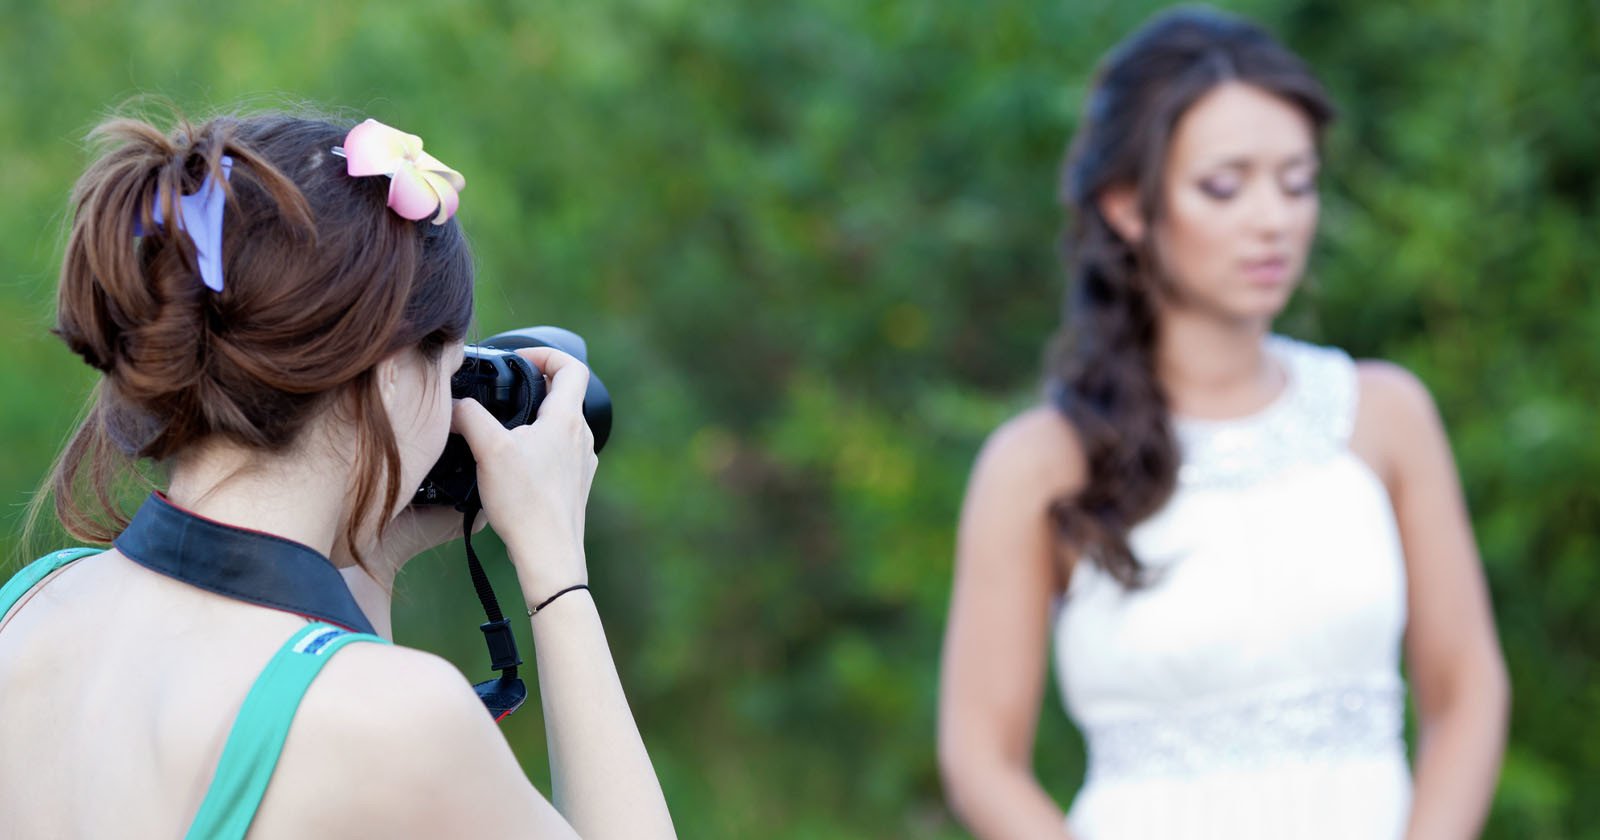  wedding photographer charged theft withholding payments 